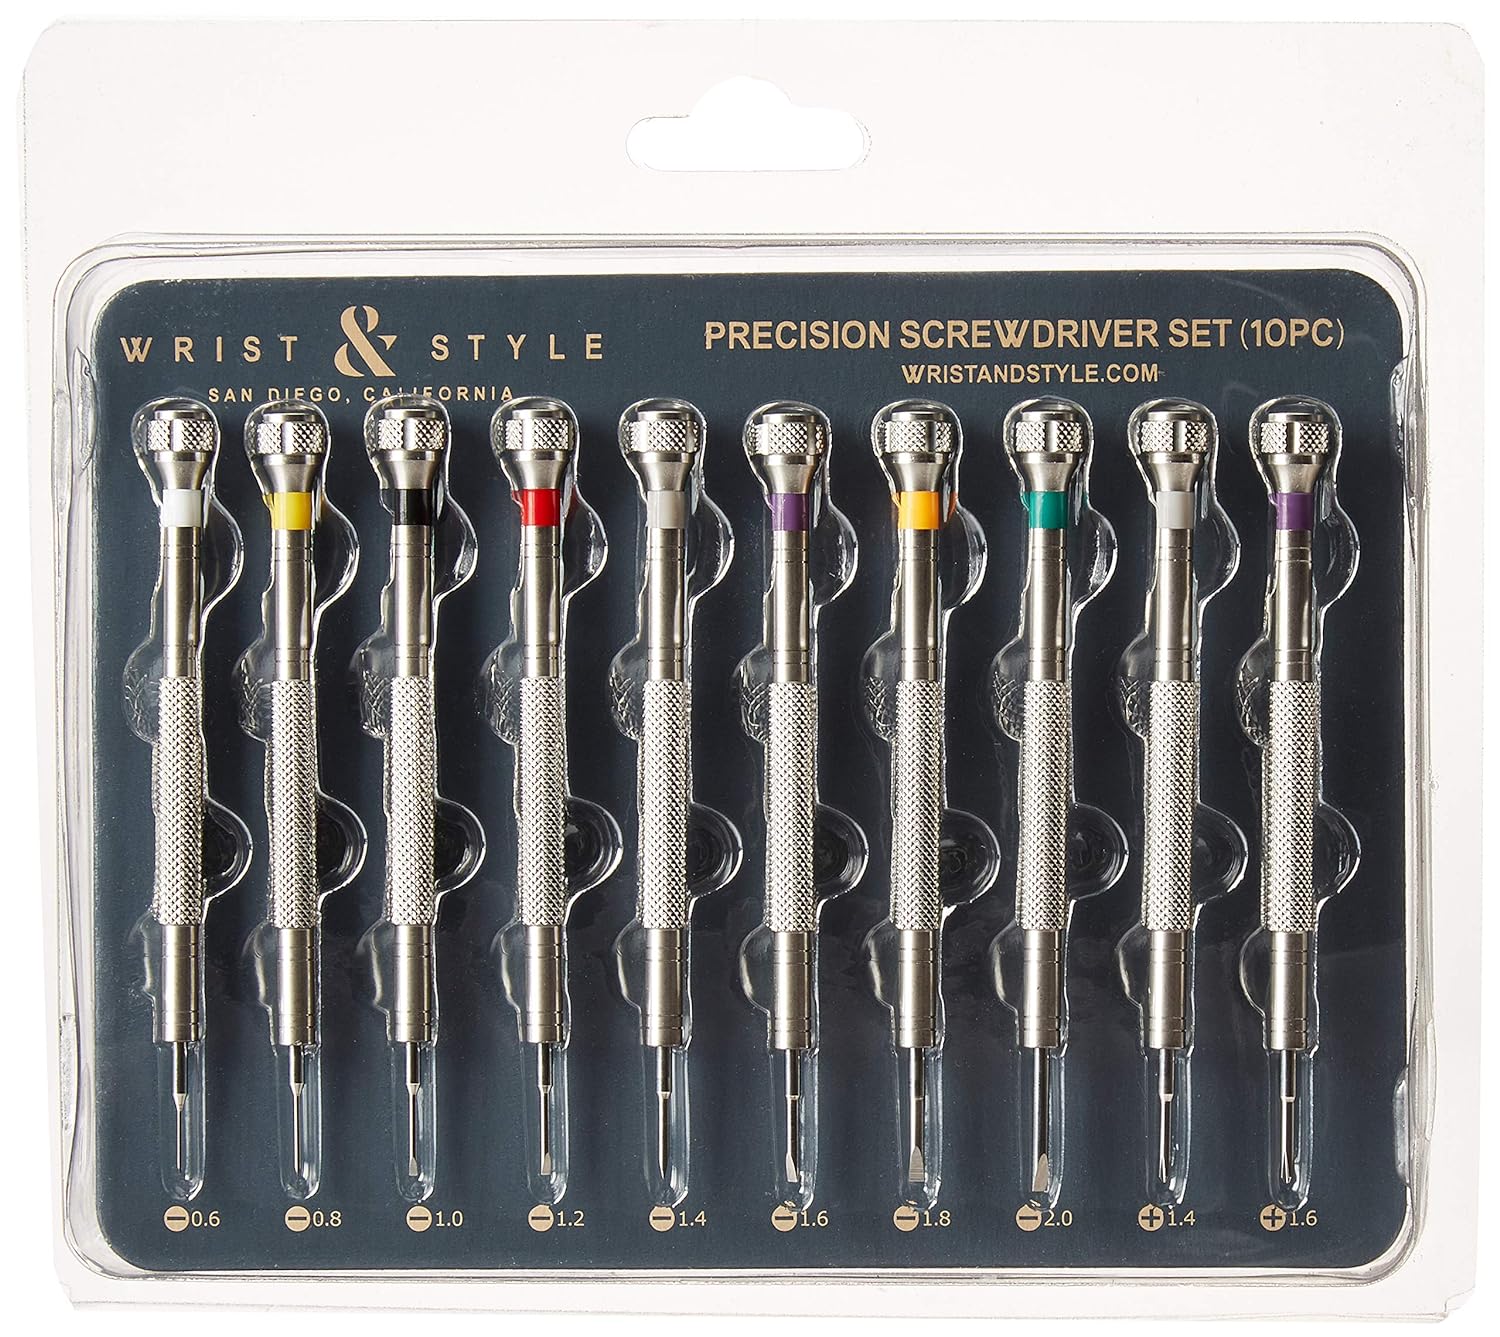 Wrist & Style Professional Screwdriver Kit by W&S for Watches, Glasses and Accessories: (10pc Tool Set) - to Adjust, Remove, Replace and Repair - Stainless Steel Professional - 10 Piece